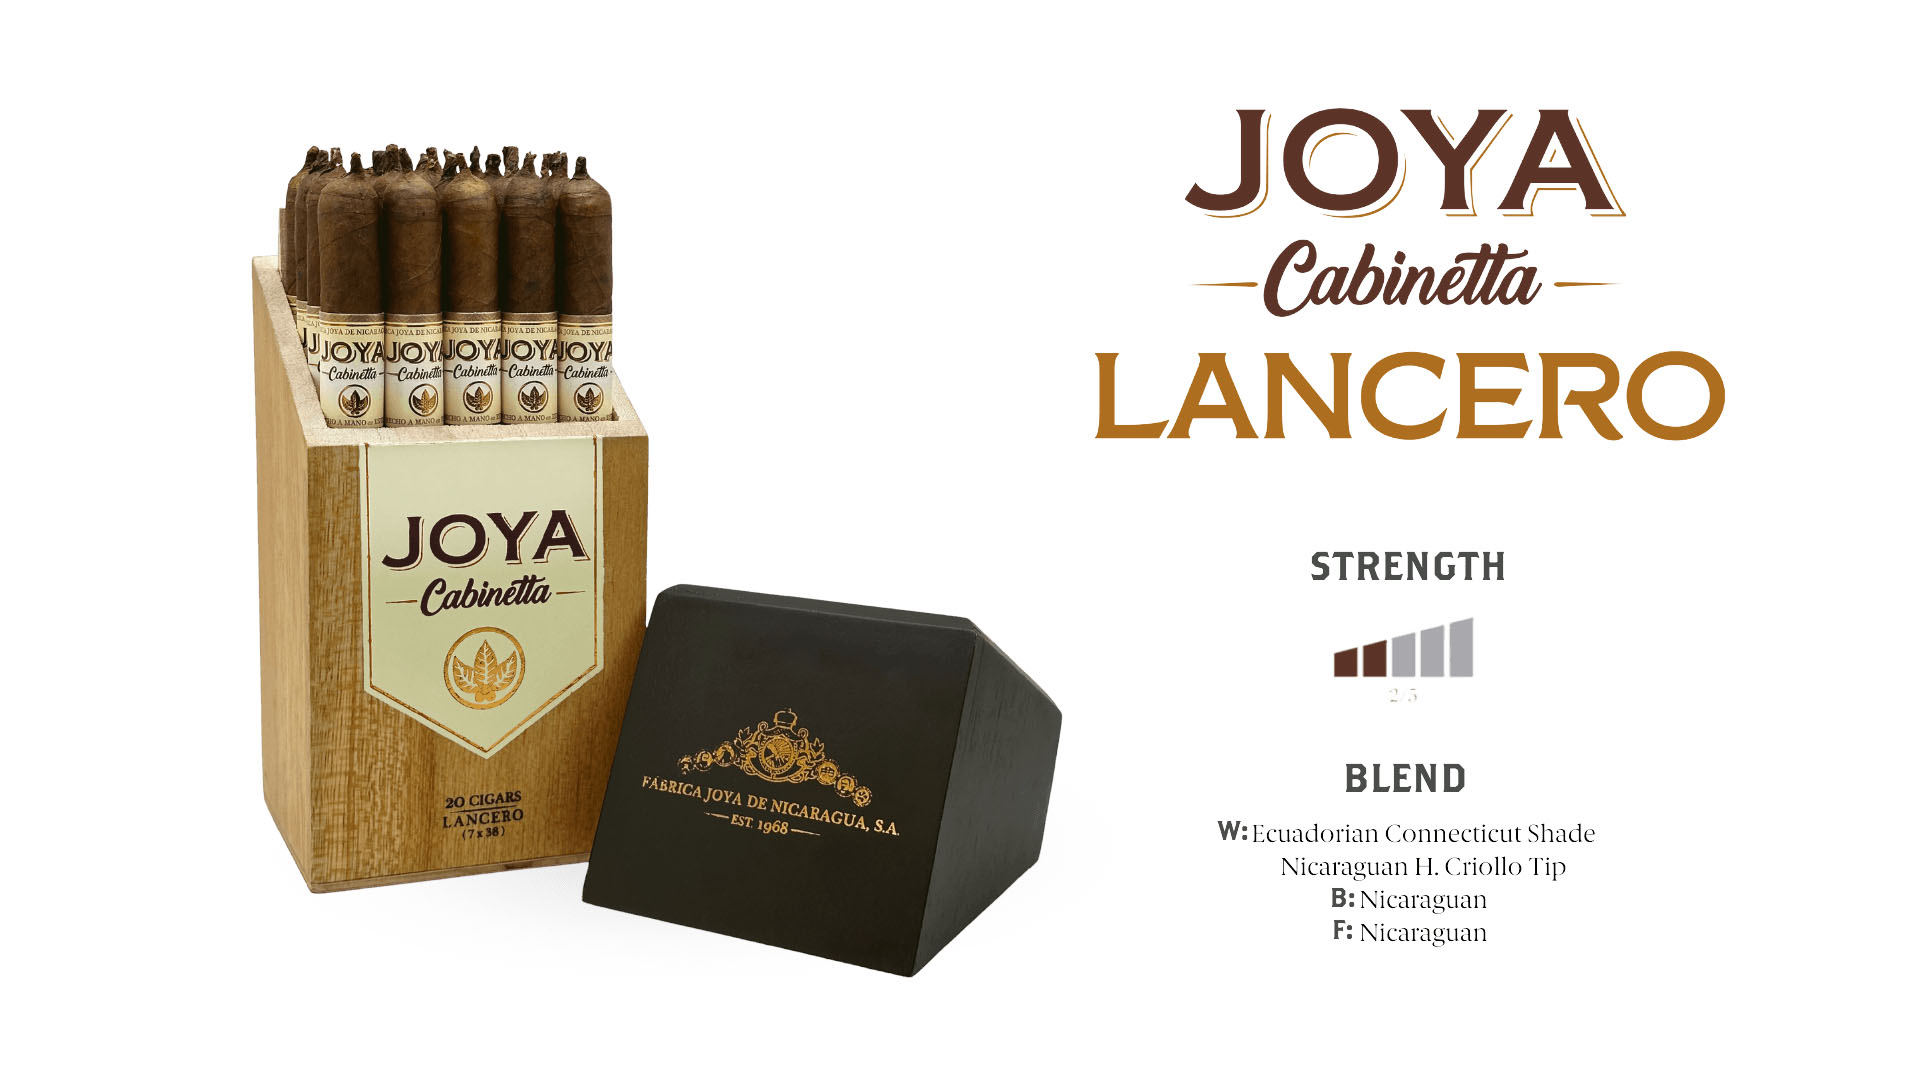 A sophisticated cigar band with symbolic imagery